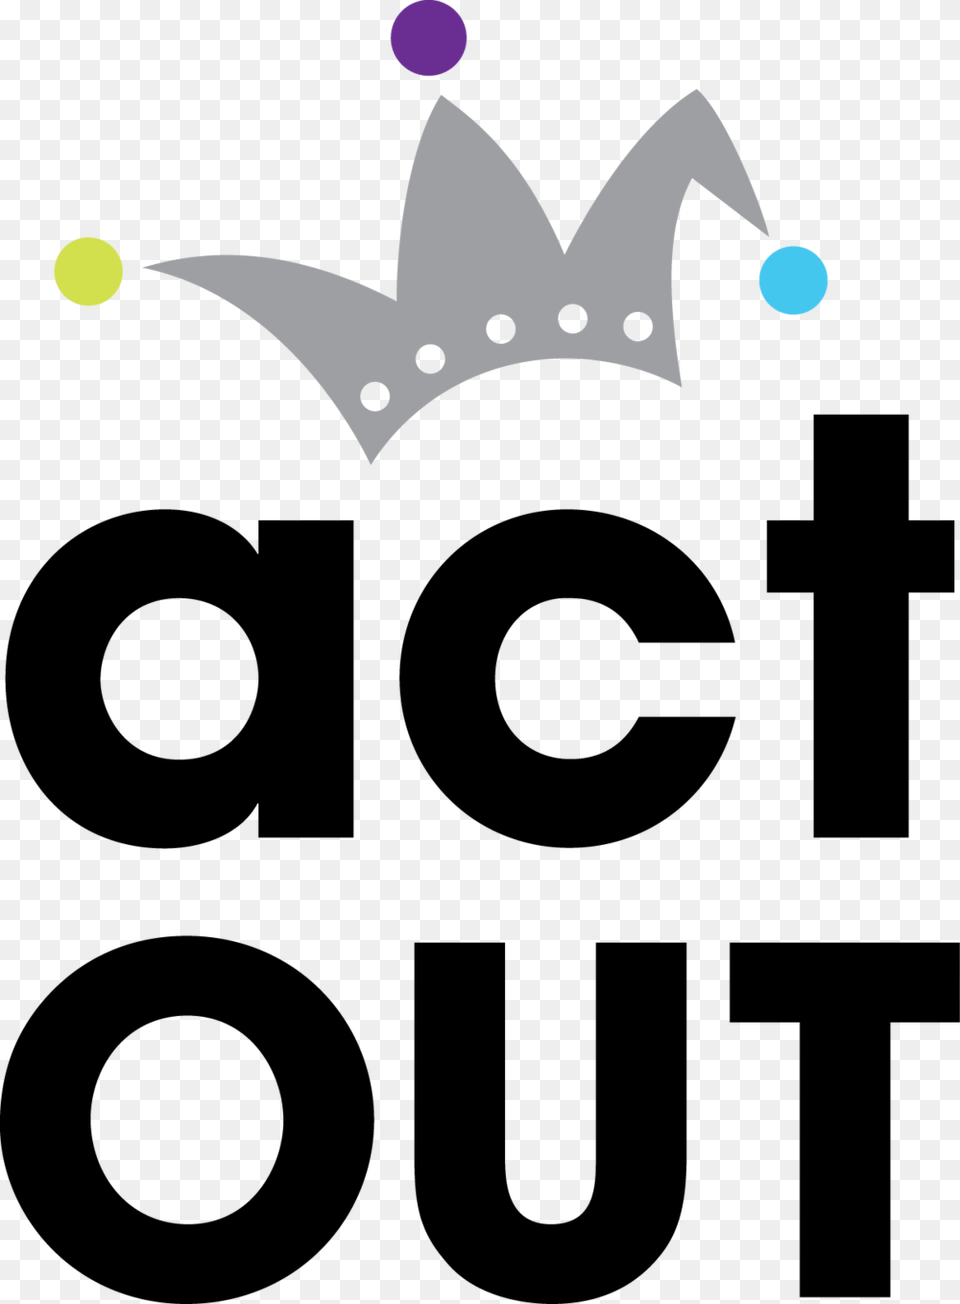 Actout Prim Cmyk Vf, Accessories, Jewelry, Crown Free Transparent Png